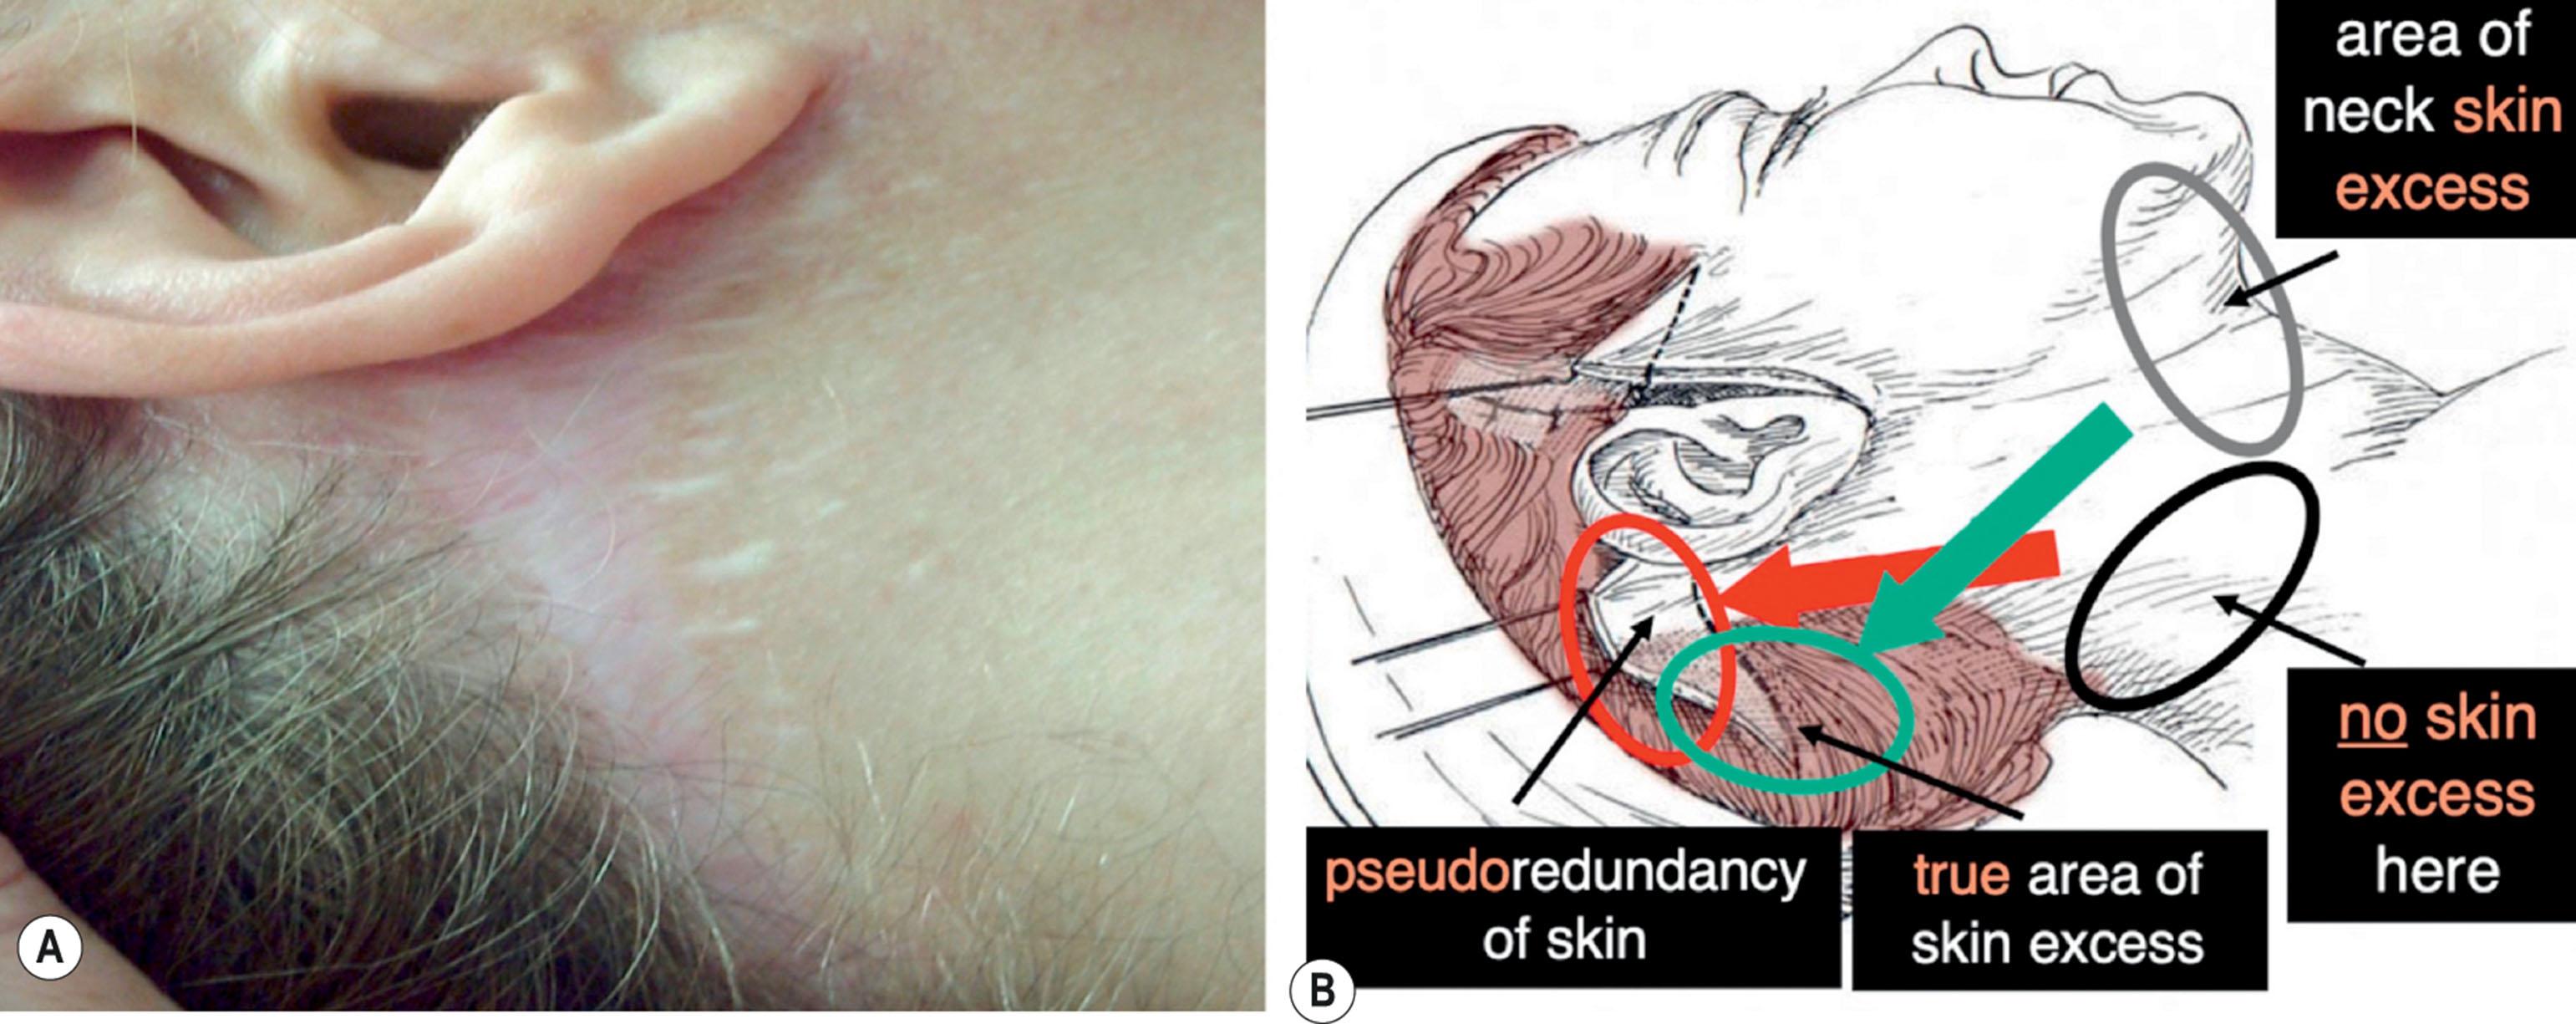 Figure 9.8.23, Understanding the cause of a wide and hypertrophic postauricular scar. (A) An example of avoidable postauricular scar widening and hypertrophy seen in a patient whose surgeon inappropriately excised skin along a superiorly directed vector (see red arrow in (B)). (Procedure performed by unknown surgeon.) (B) Deconstruction of the scar widening and hypertrophy seen in (A). The surgeon made a well-intended, but conceptually flawed attempt to advance the postauricular skin flap along a superiorly directed vector (red arrow), typically in an effort to avoid occipital hairline displacement and reconstitute the occipital hairline. This erroneously assumes excess skin is present in the lower lateral neck (black circle) and produces a false apparent redundancy of skin over the mastoid (skin shown in red circle) due to the elevated position of the patient’s shoulder while lying supine on the operating table. When the patient assumes an upright position postoperatively and the shoulder drops, a skin deficit is created and traction of the wound produces a wide and hypertrophic scar (see (A)). Gray circle shows actual area of neck skin excess and green arrow the proper vector of skin flap advancement if optimal improvement in the anterior neck and submental region is to be obtained. The green circle denotes the area where skin actually should be excised (along an occipital hairline incision). No skin should be excised in the area of the red circle.